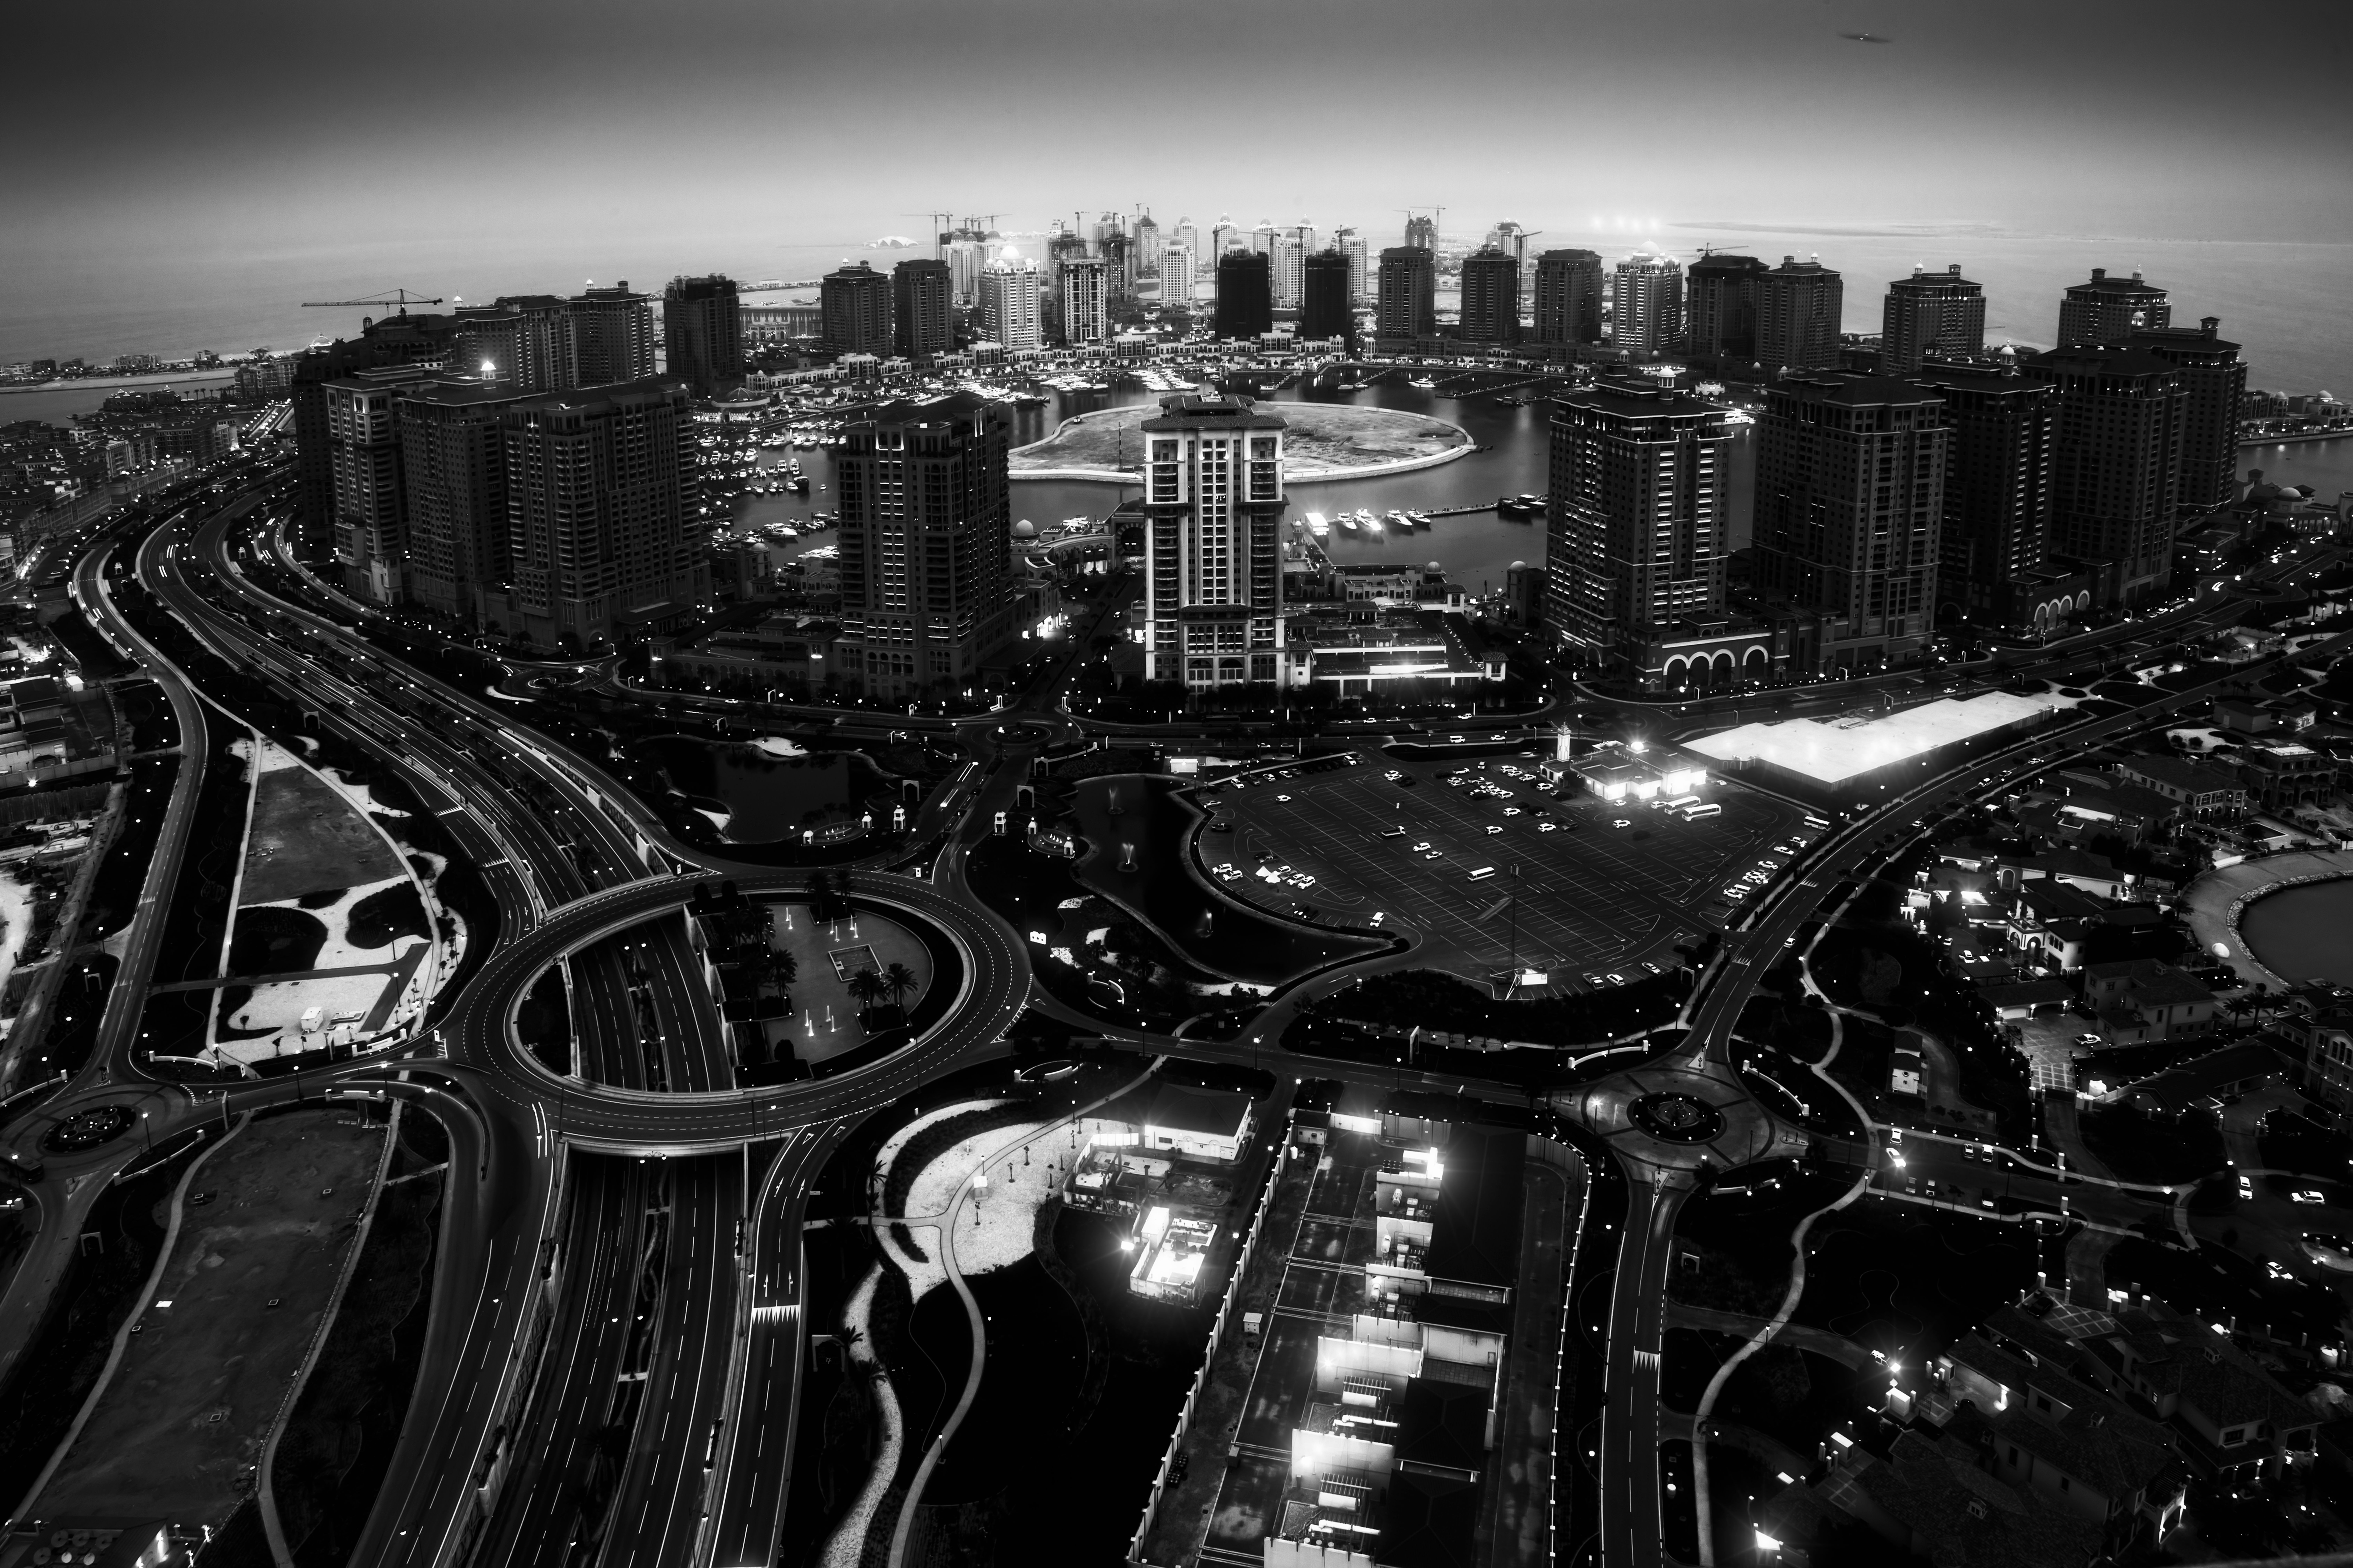 Black and white city skyline seen from above.